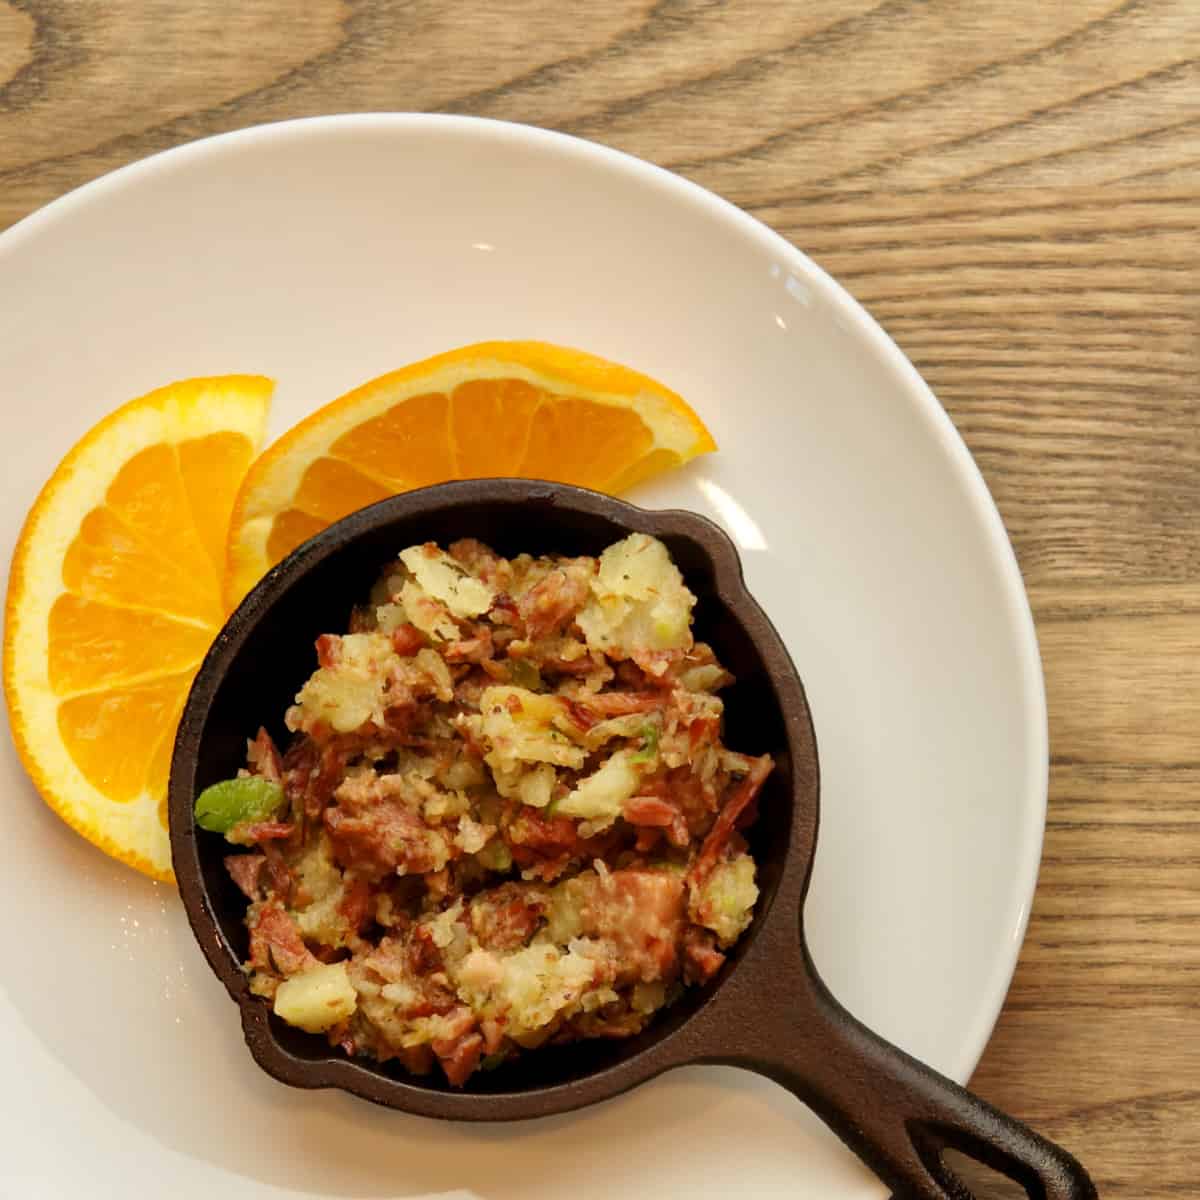 Corned bee hash being served in a small skillet along with an orange garnish.